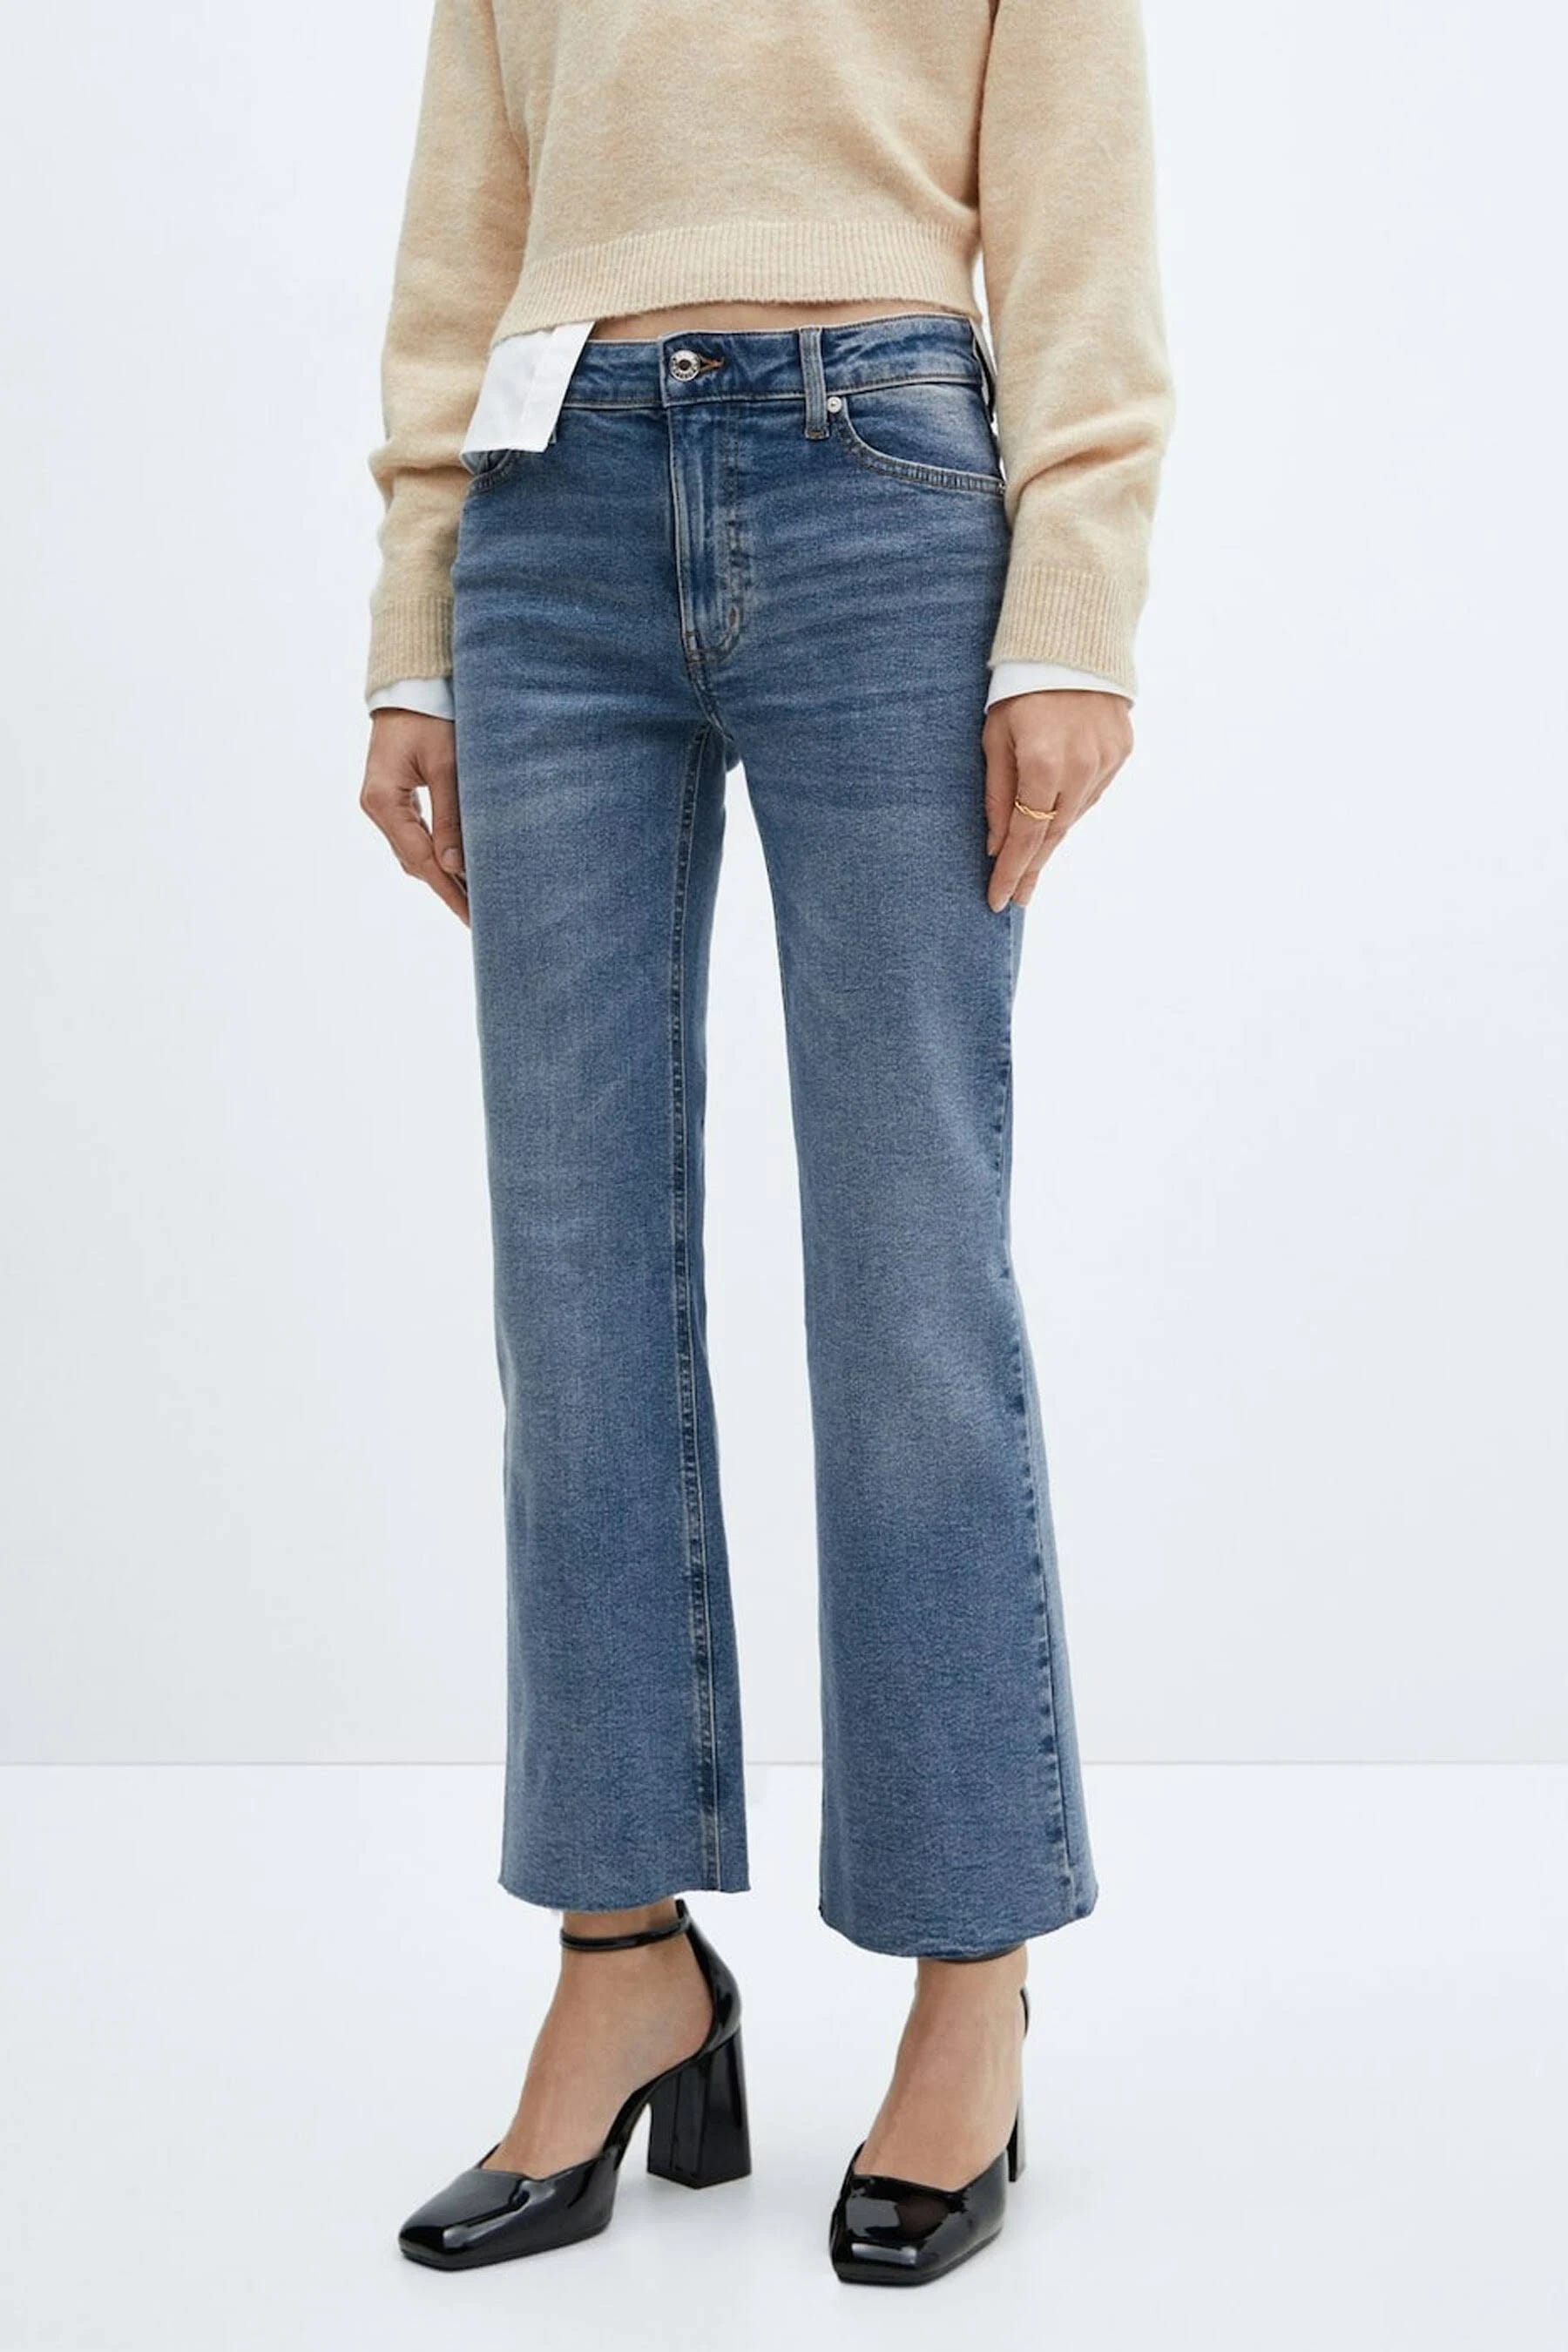 Flared Jeans with Crop Design for Petite Women | Image